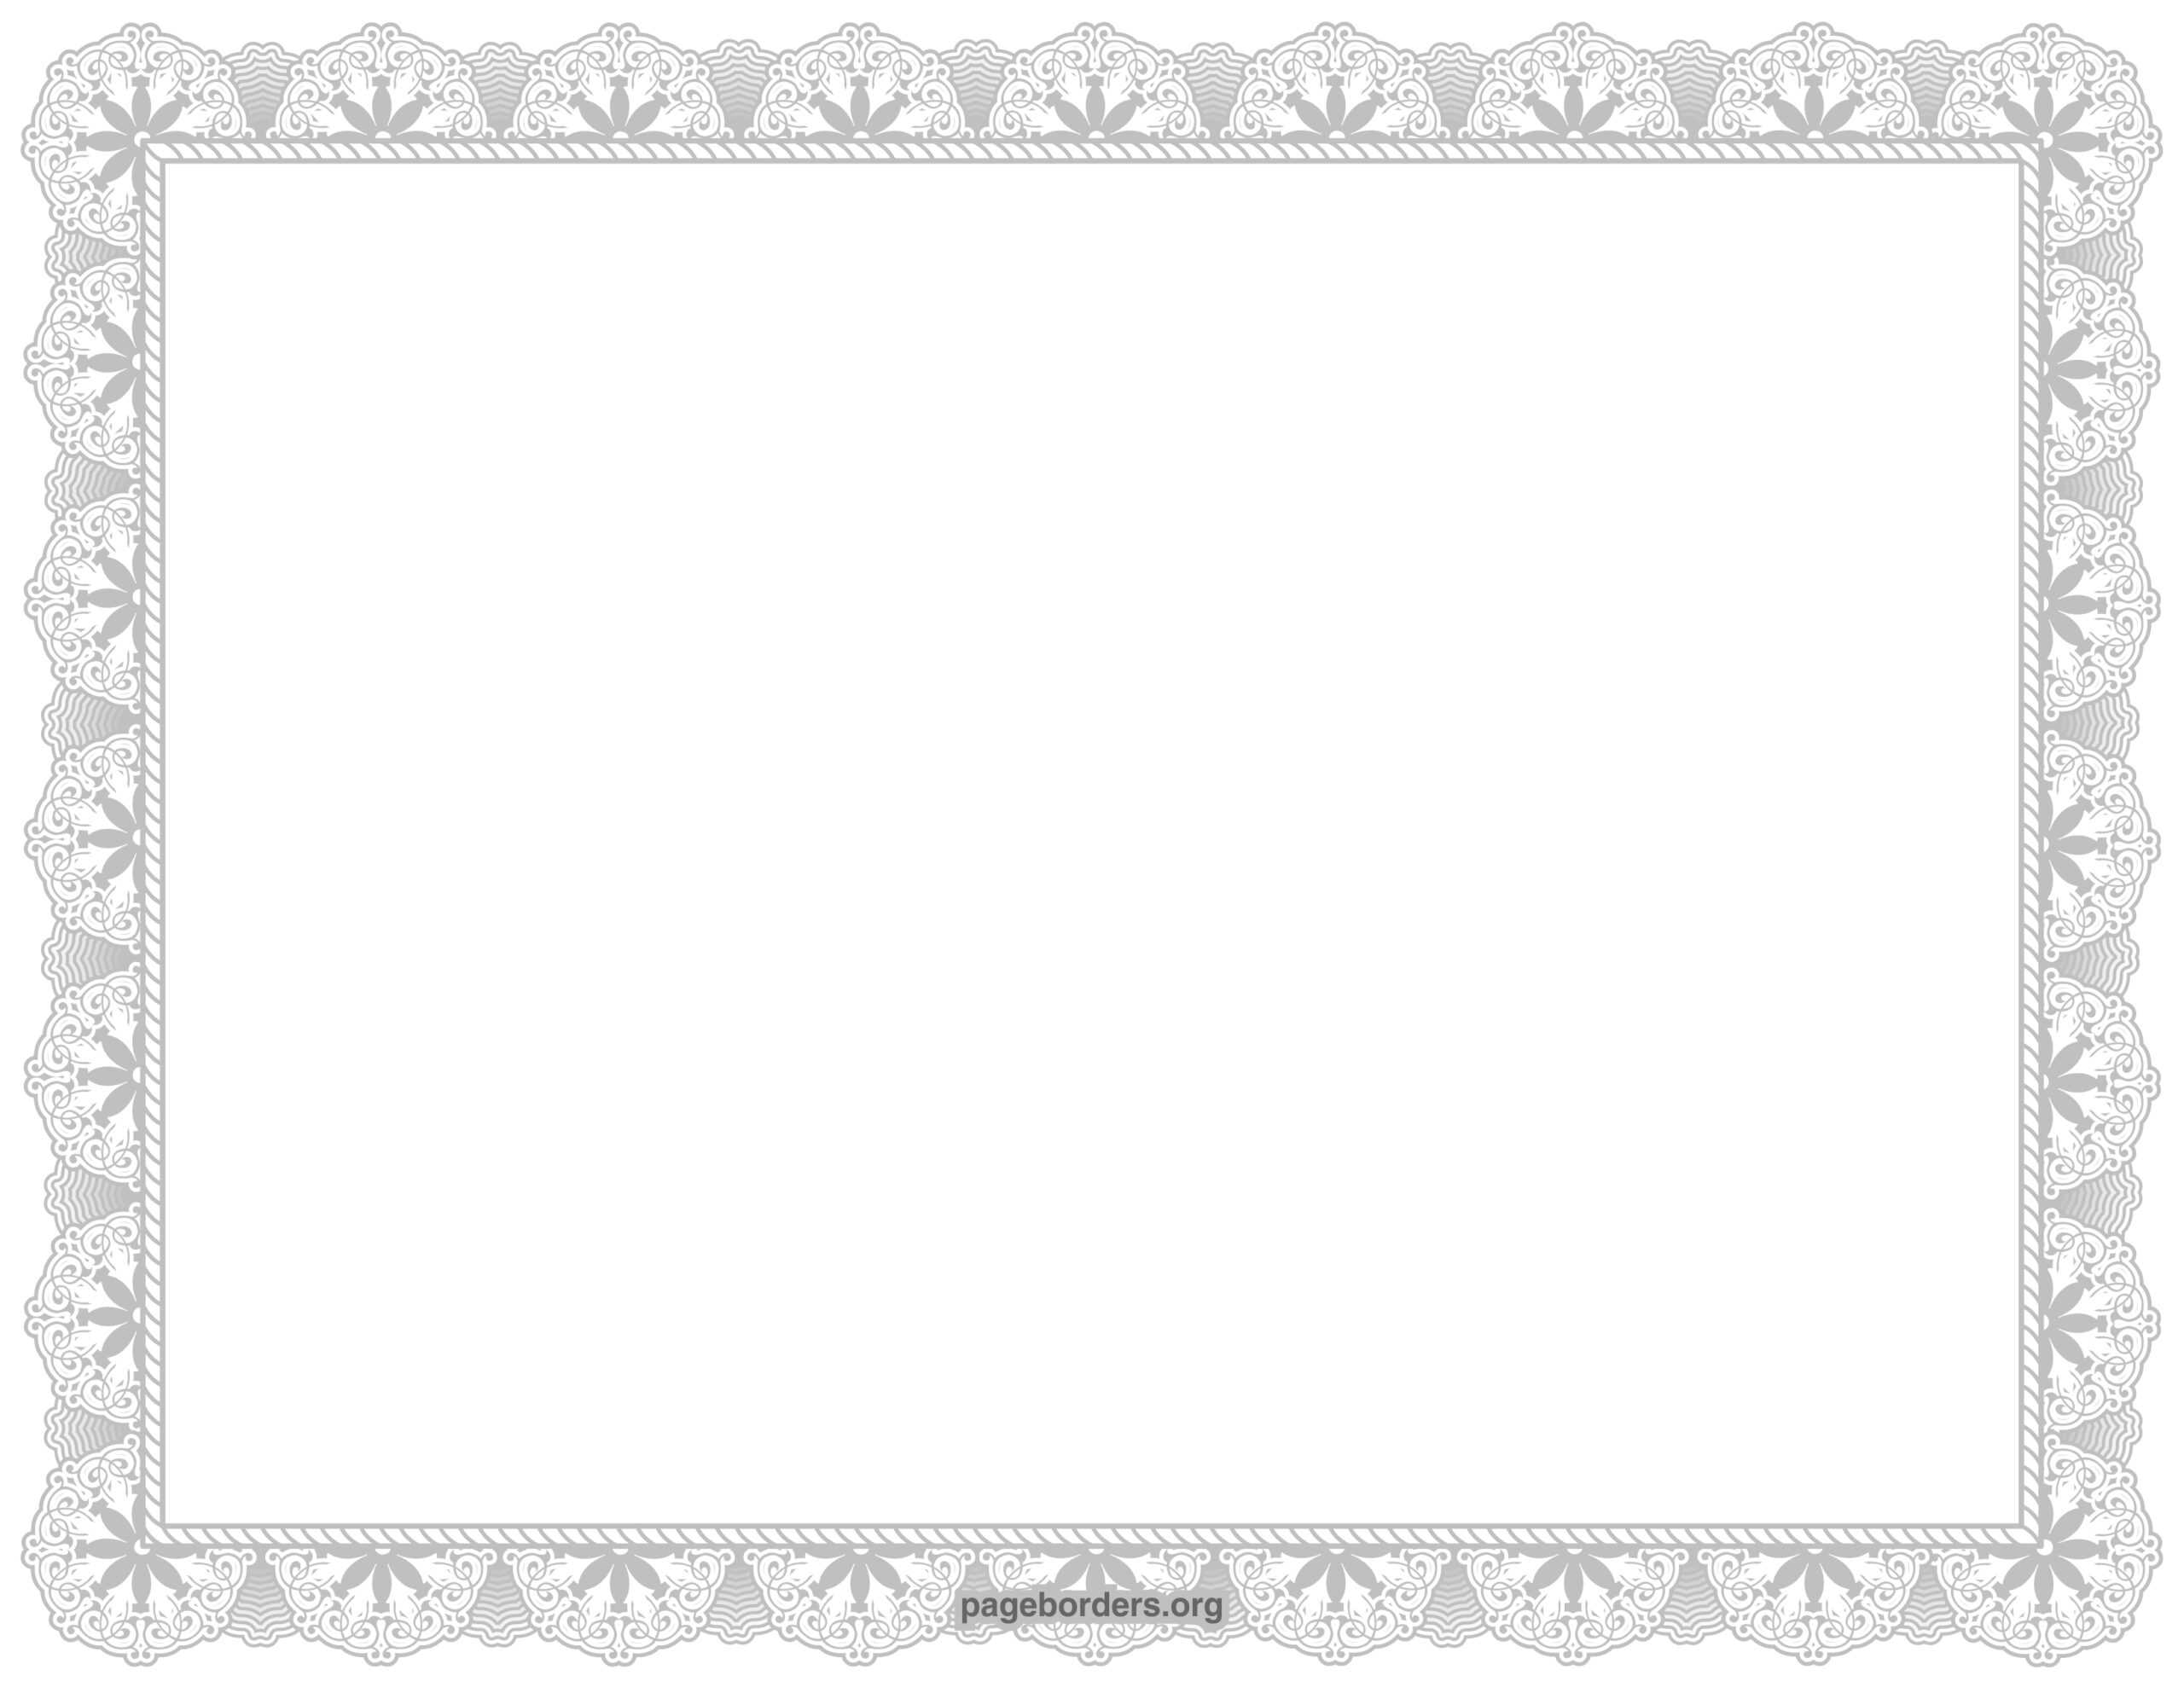 Free Certificate Border, Download Free Clip Art, Free Clip Regarding Free Printable Certificate Border Templates